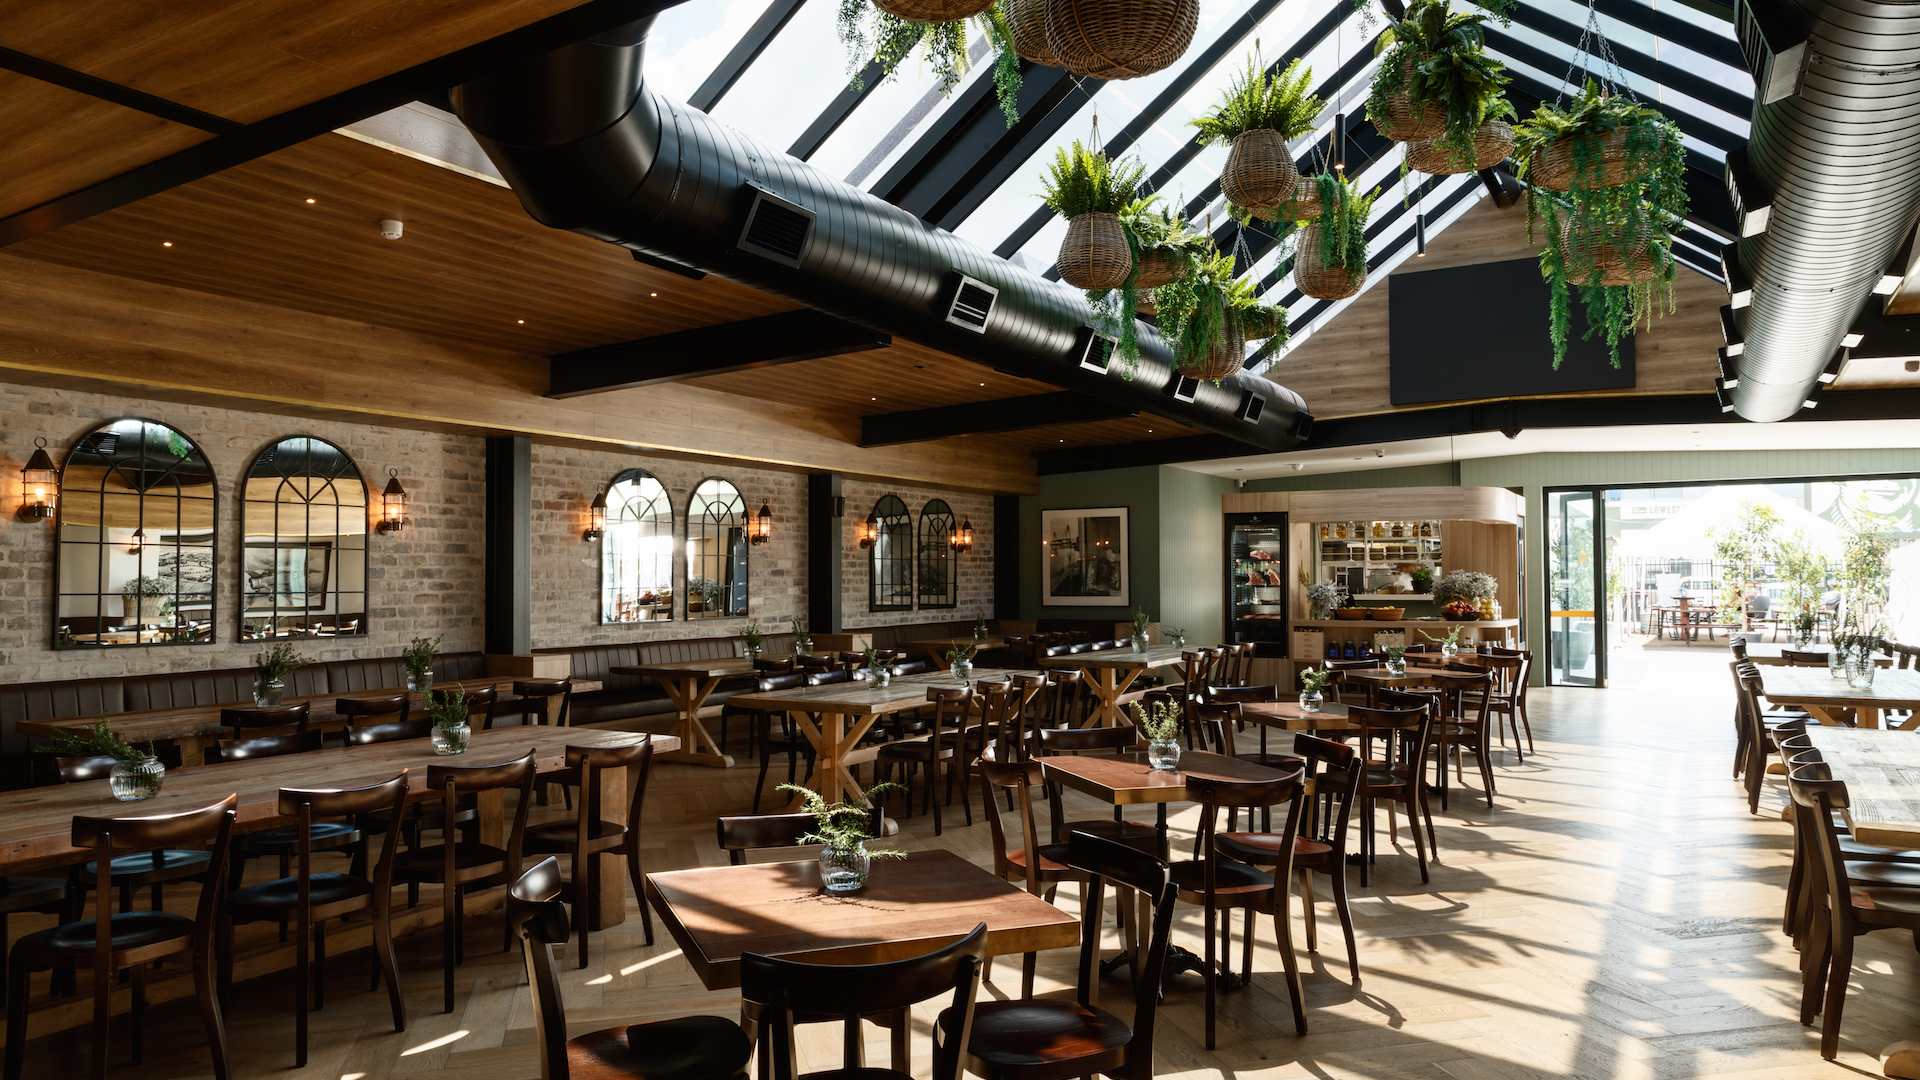 The 170-Year-Old Royal Richmond Hotel Now Boasts a Sunlit Bistro and Timber-Clad Cocktail Bar